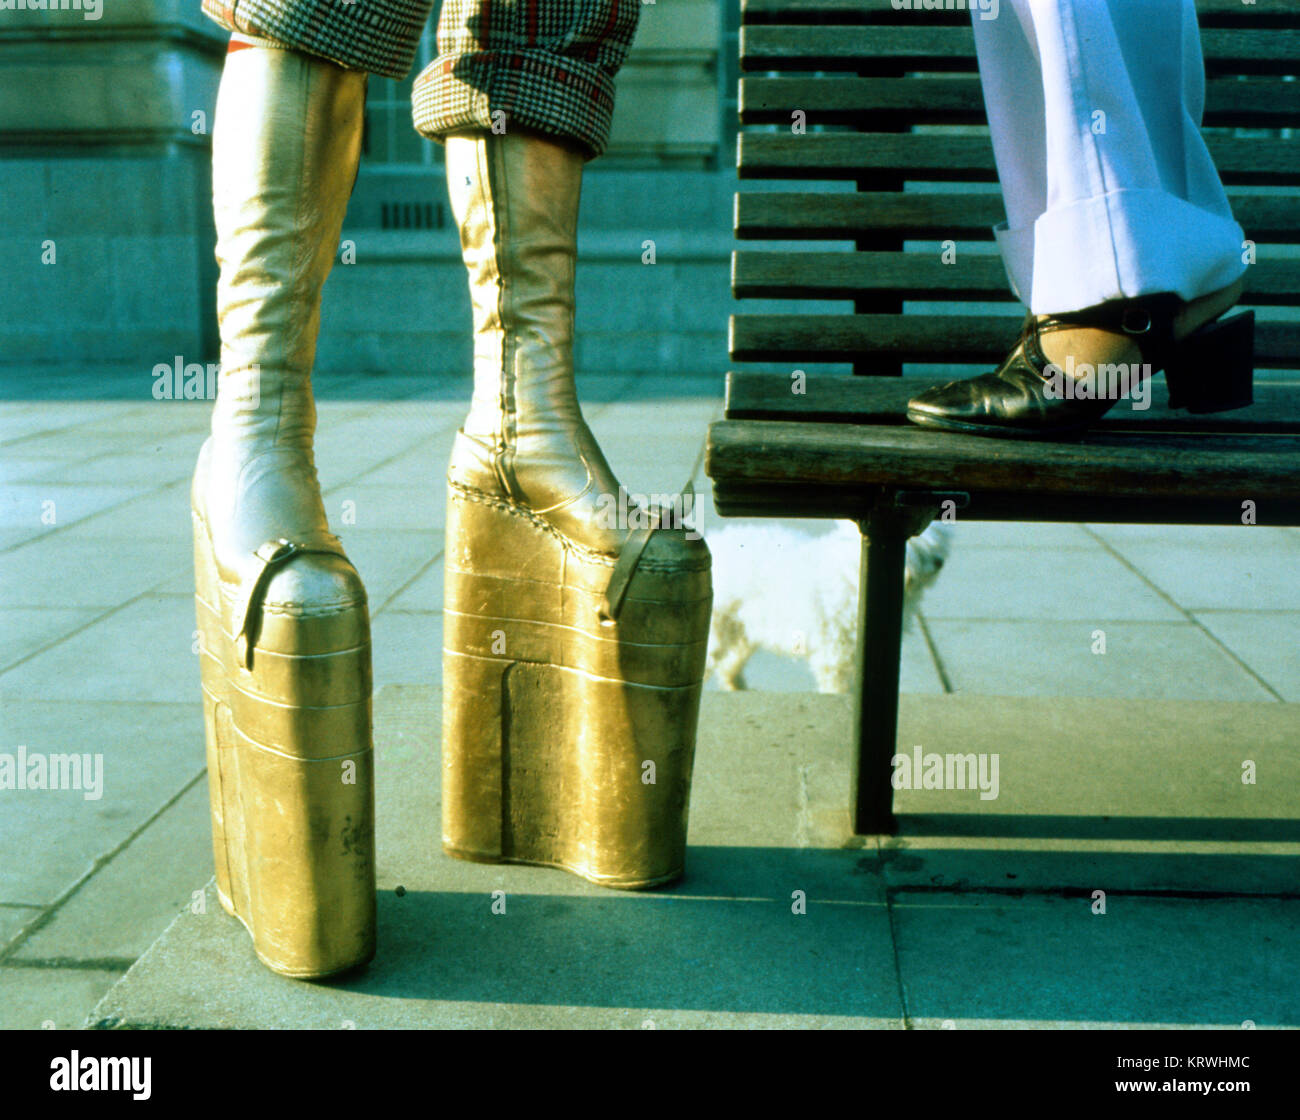 70s Shoes High Resolution Stock Photography and Images - Alamy